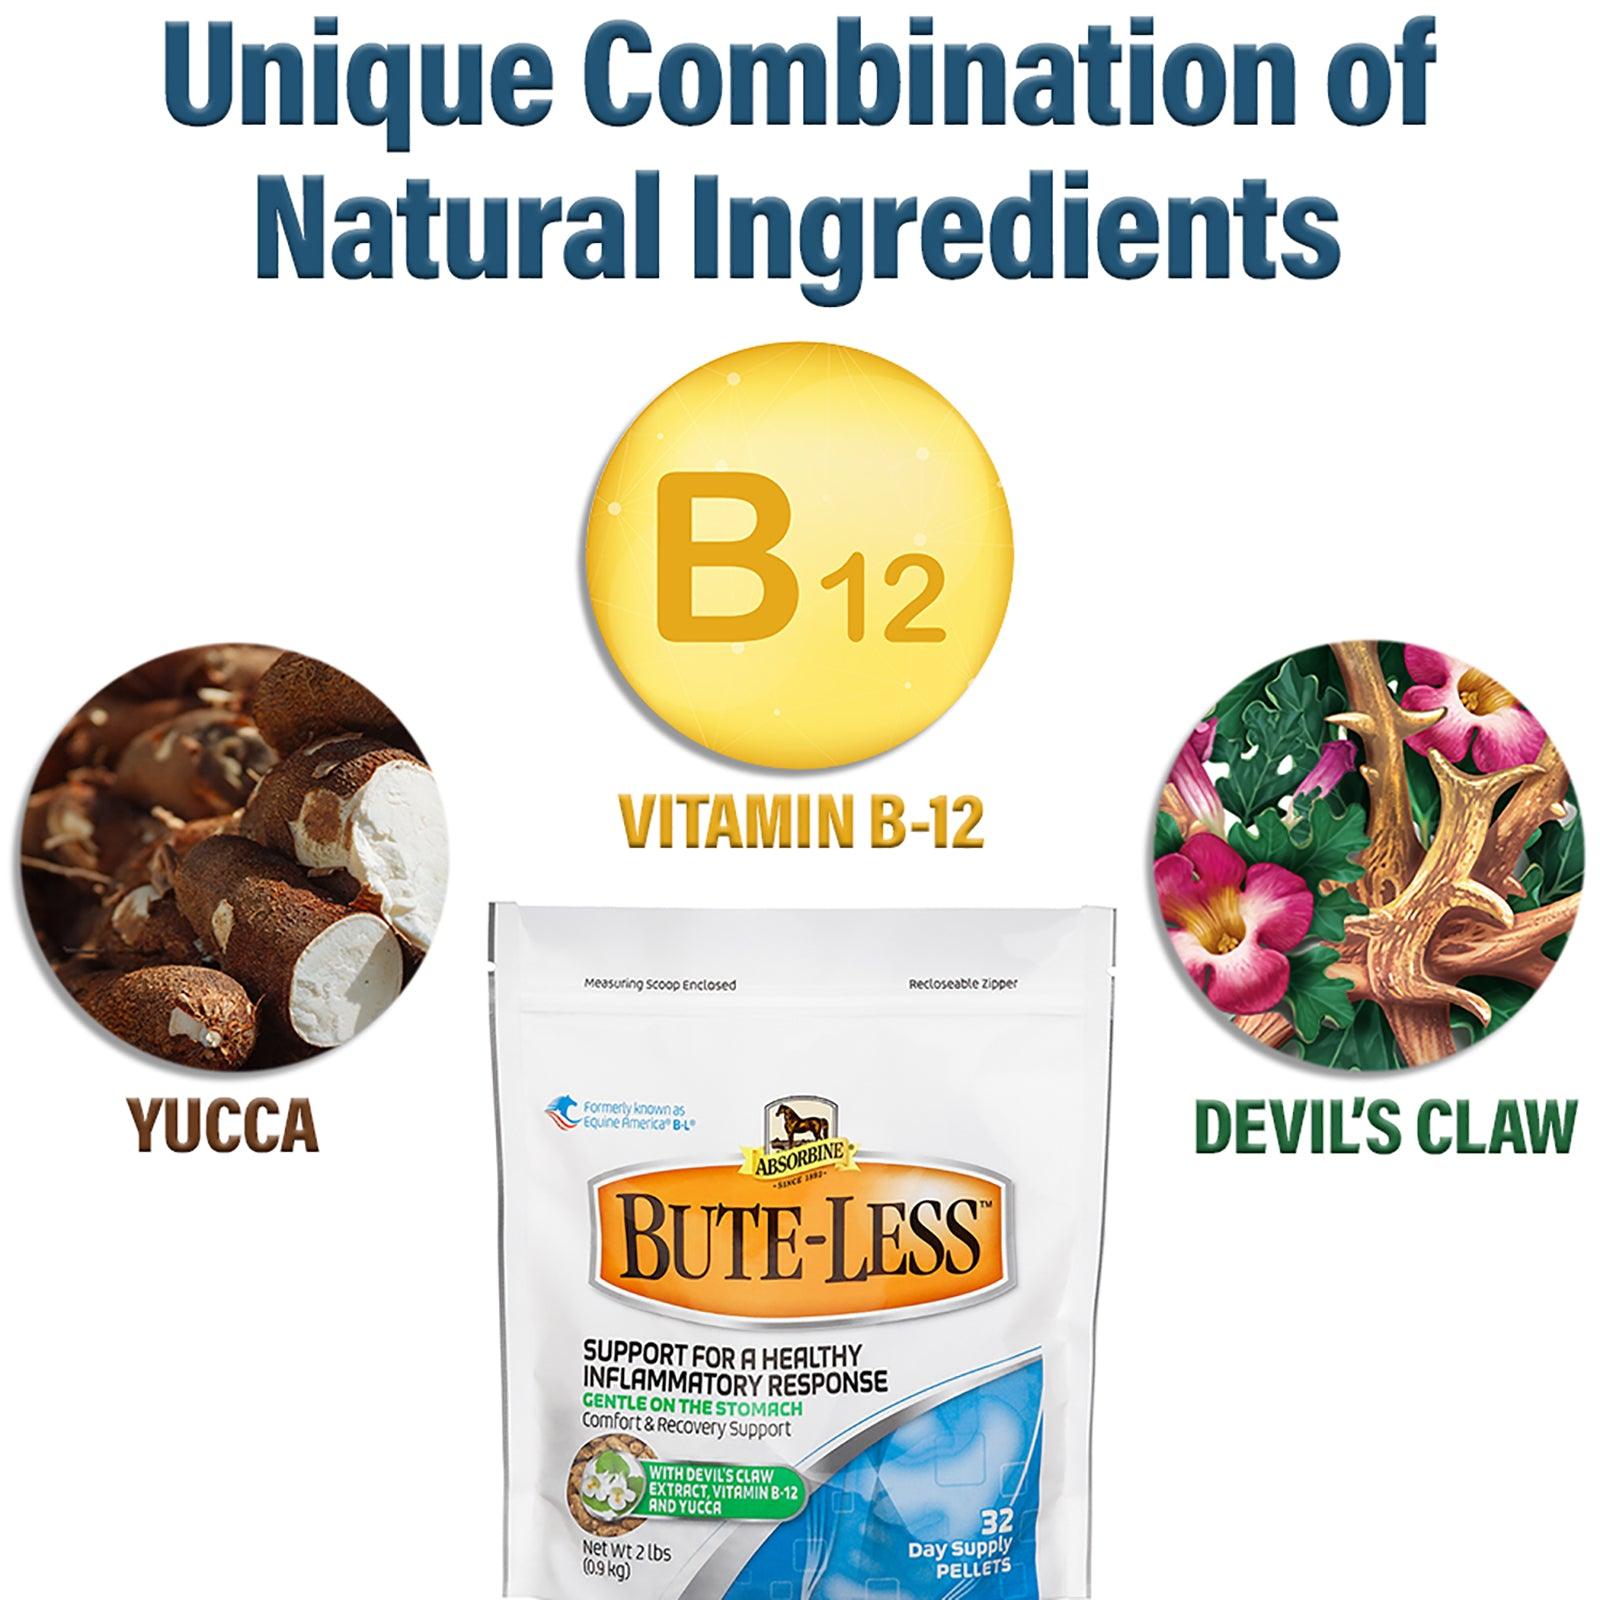 Bute-less a unique combination of natural ingredients containing Yucca, Vitamin B-12, and Devil's Claw